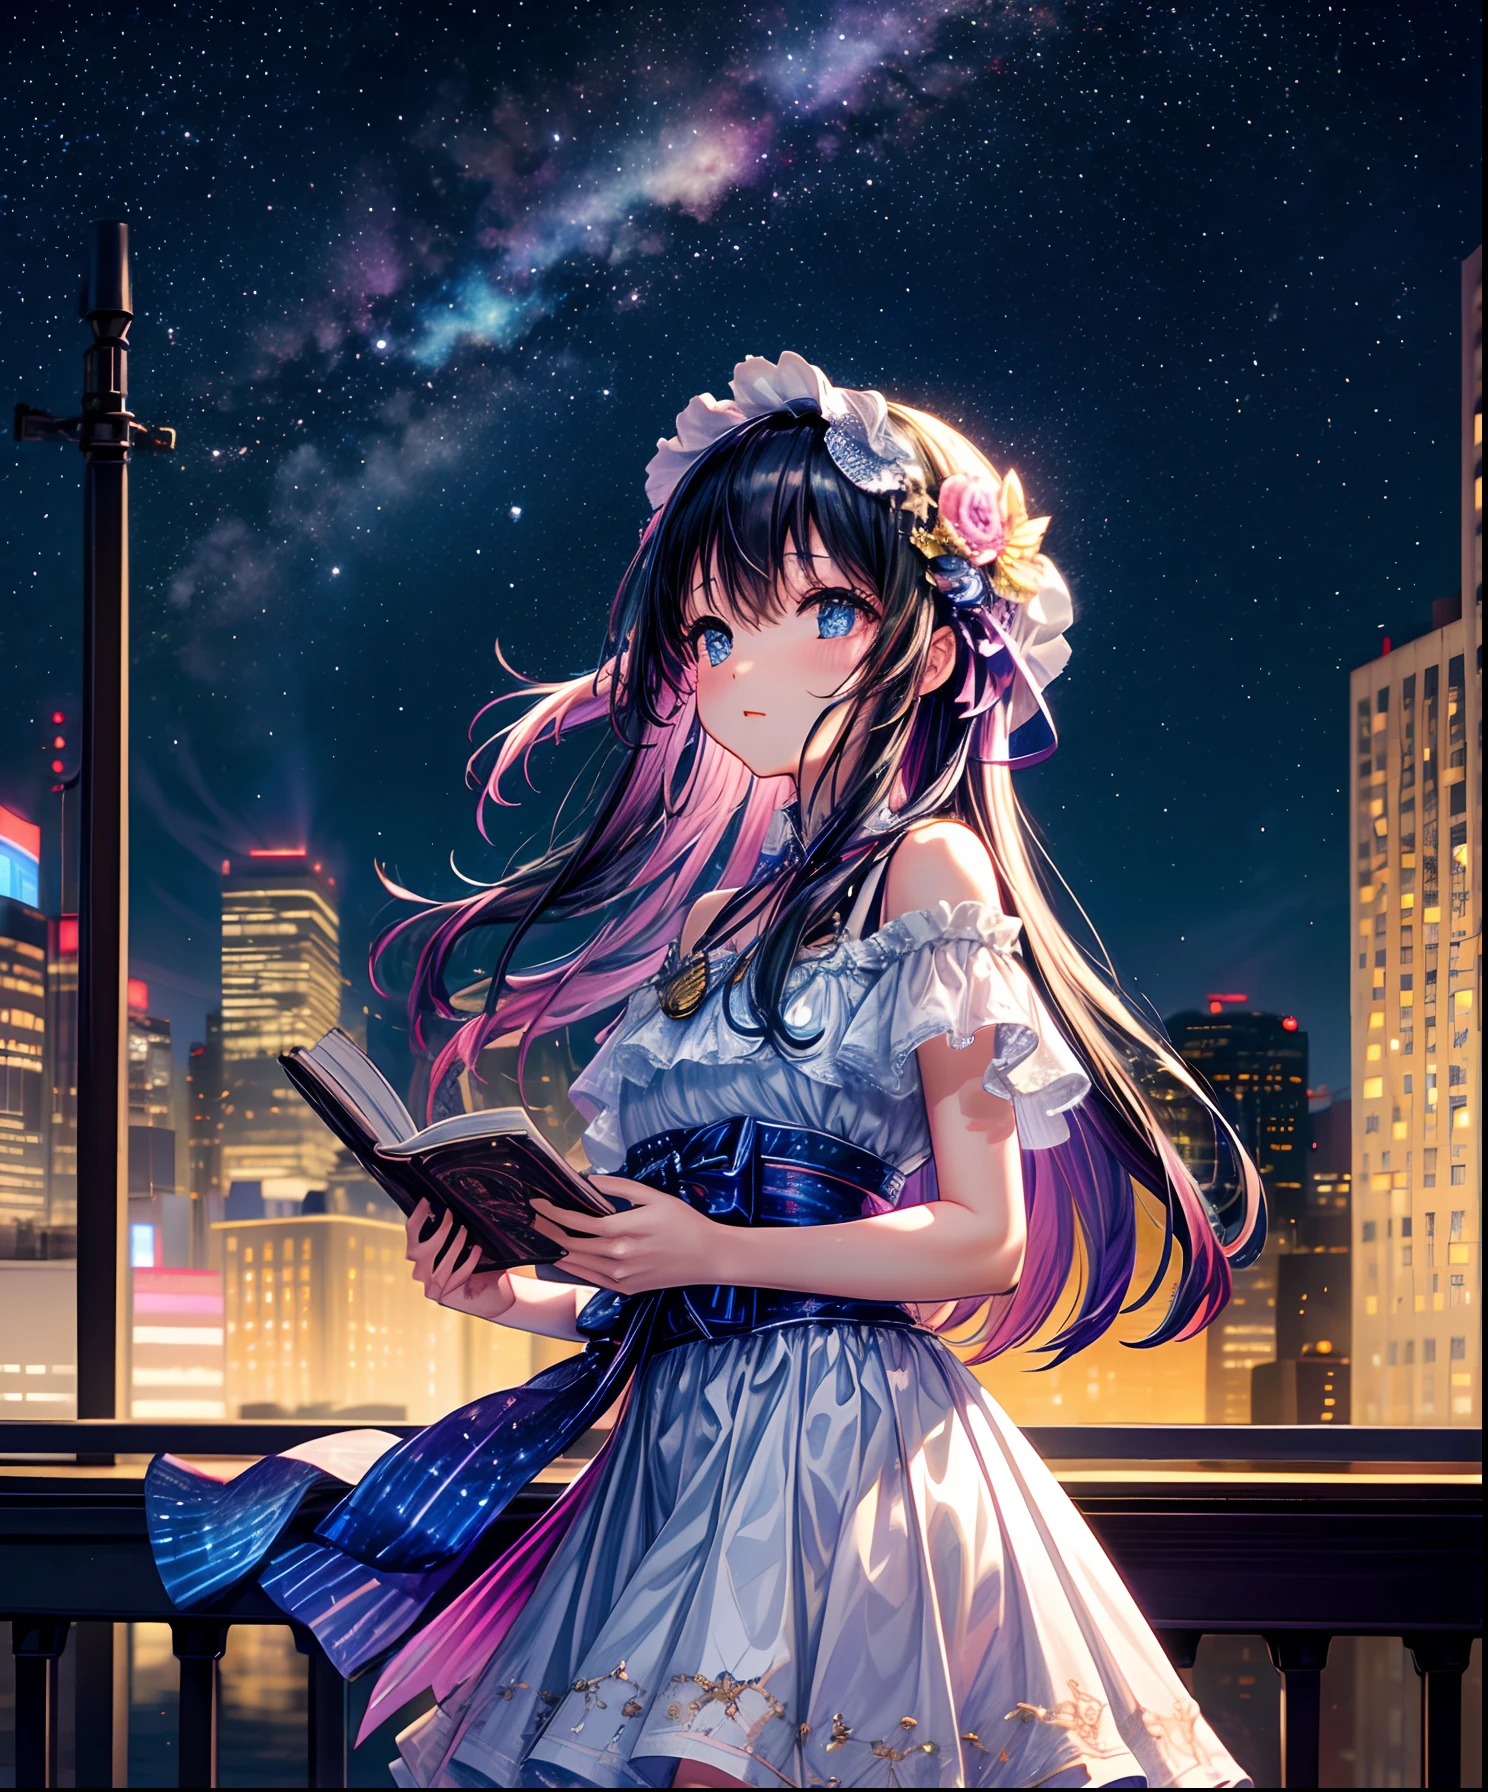 Sheet music playback、Colorful sheet music is played、Cute girl characters、 Night view from a high place、Drawing a large number of skyscrapers, Looking up at the starry sky. Surround her with colorful nebulae and colorful metropolis.